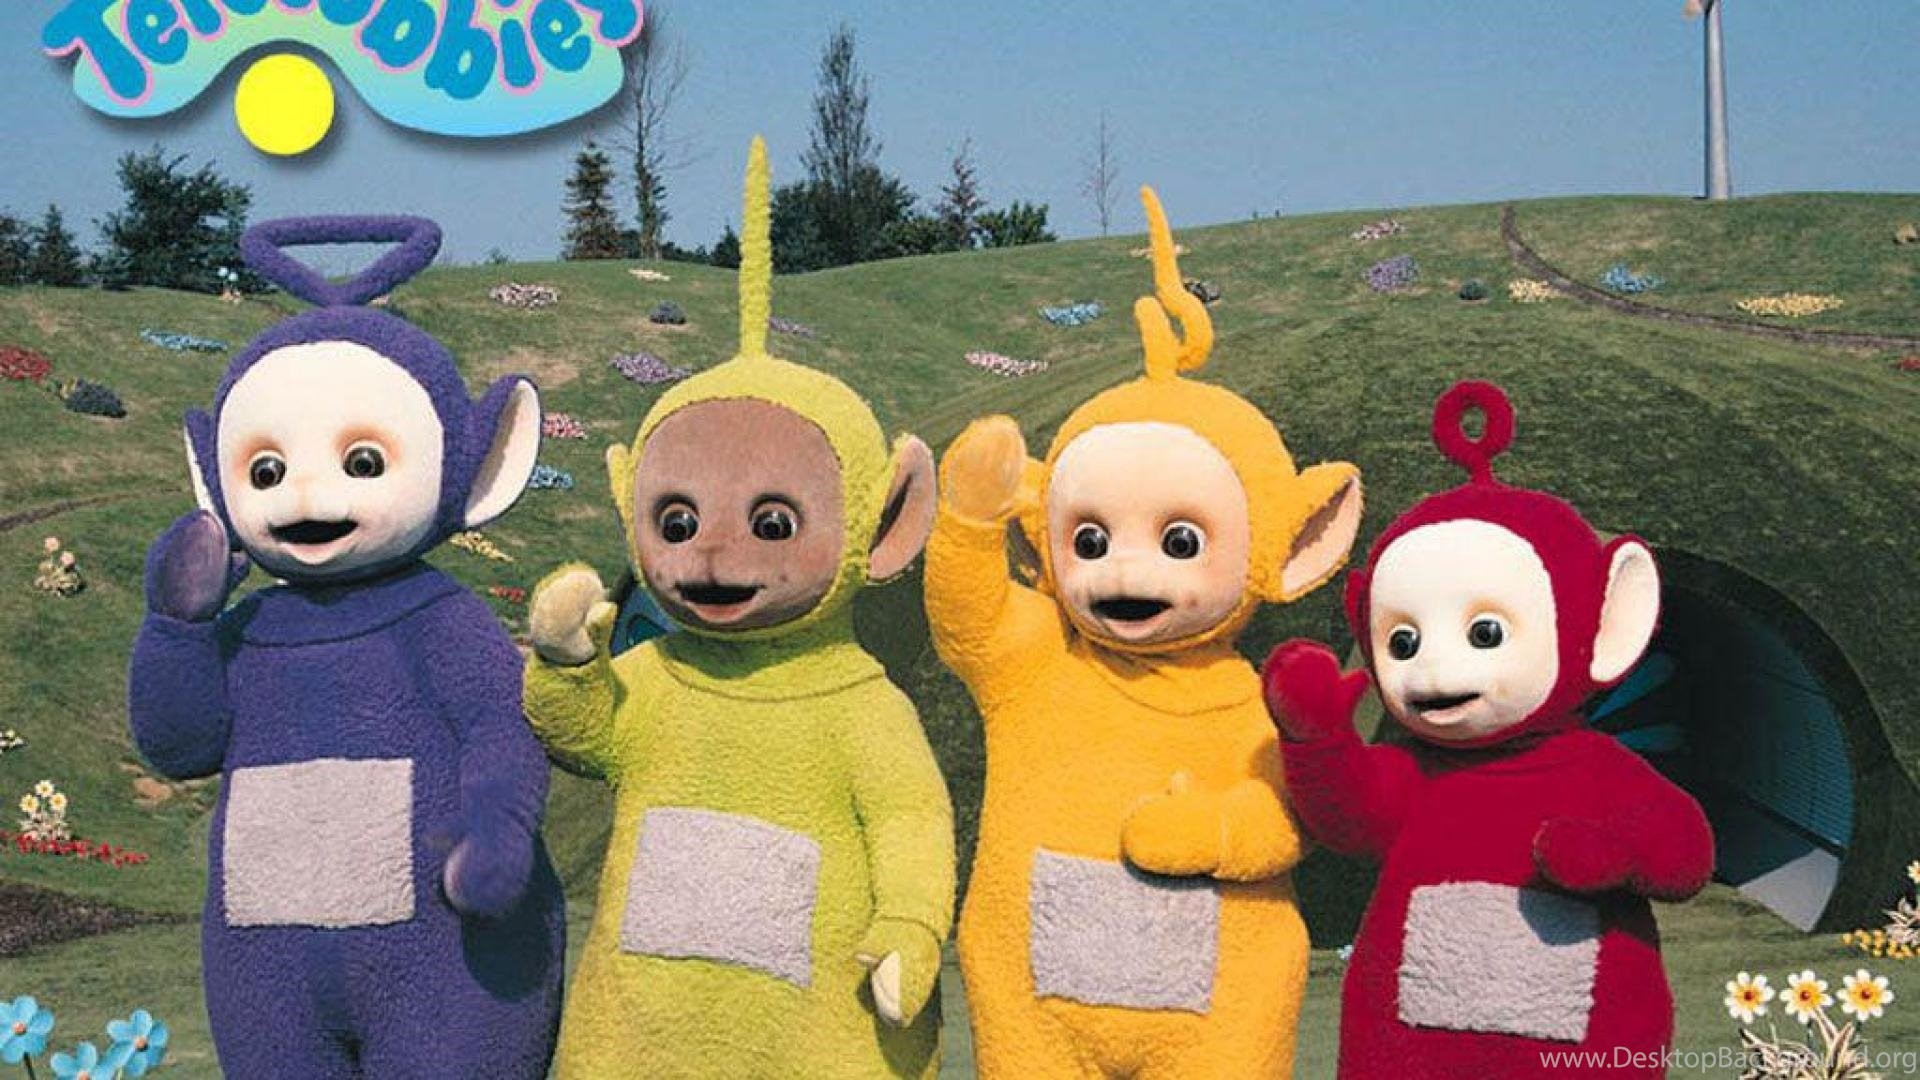 1920x1080 ... teletubbies wallpapers wallpapers ...